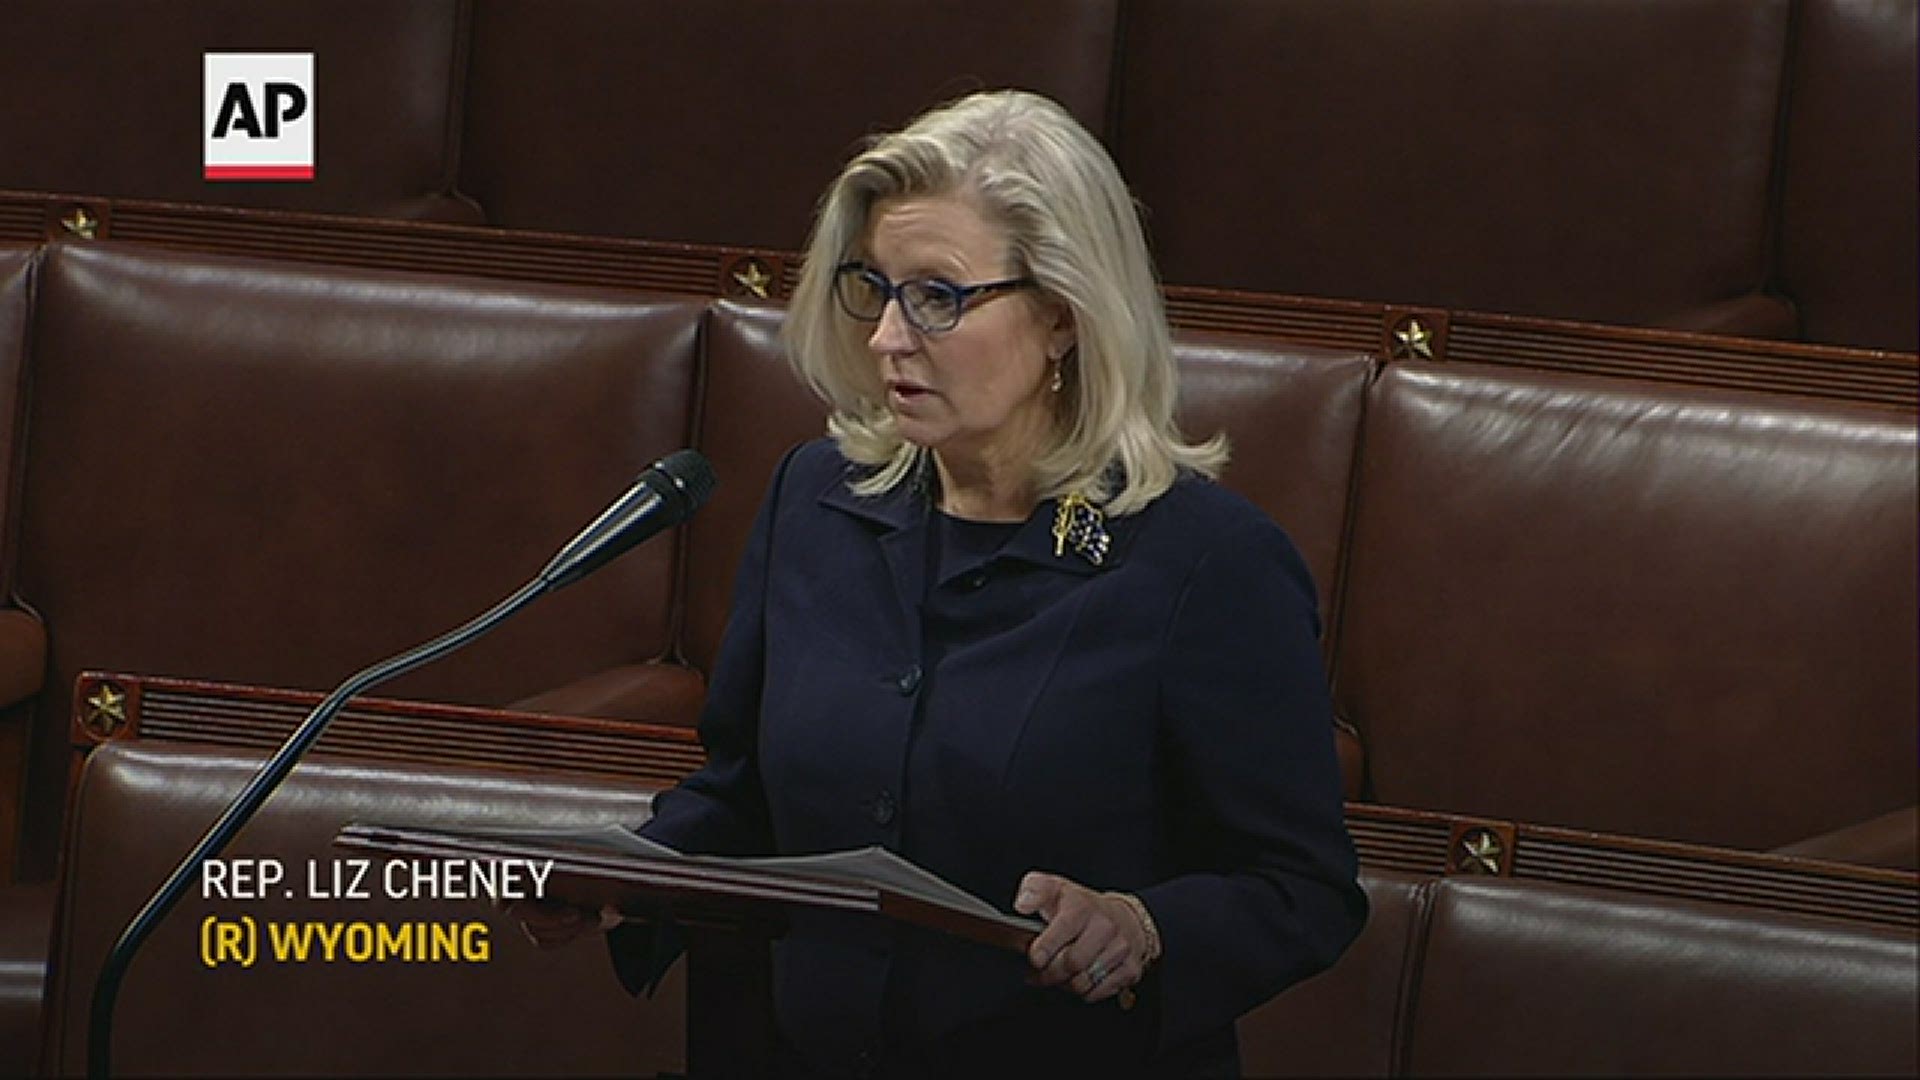 Rep. Liz Cheney lashed out at leaders of her own Republican Party, accusing former President Trump and his supporters of following a path to undermine democracy.